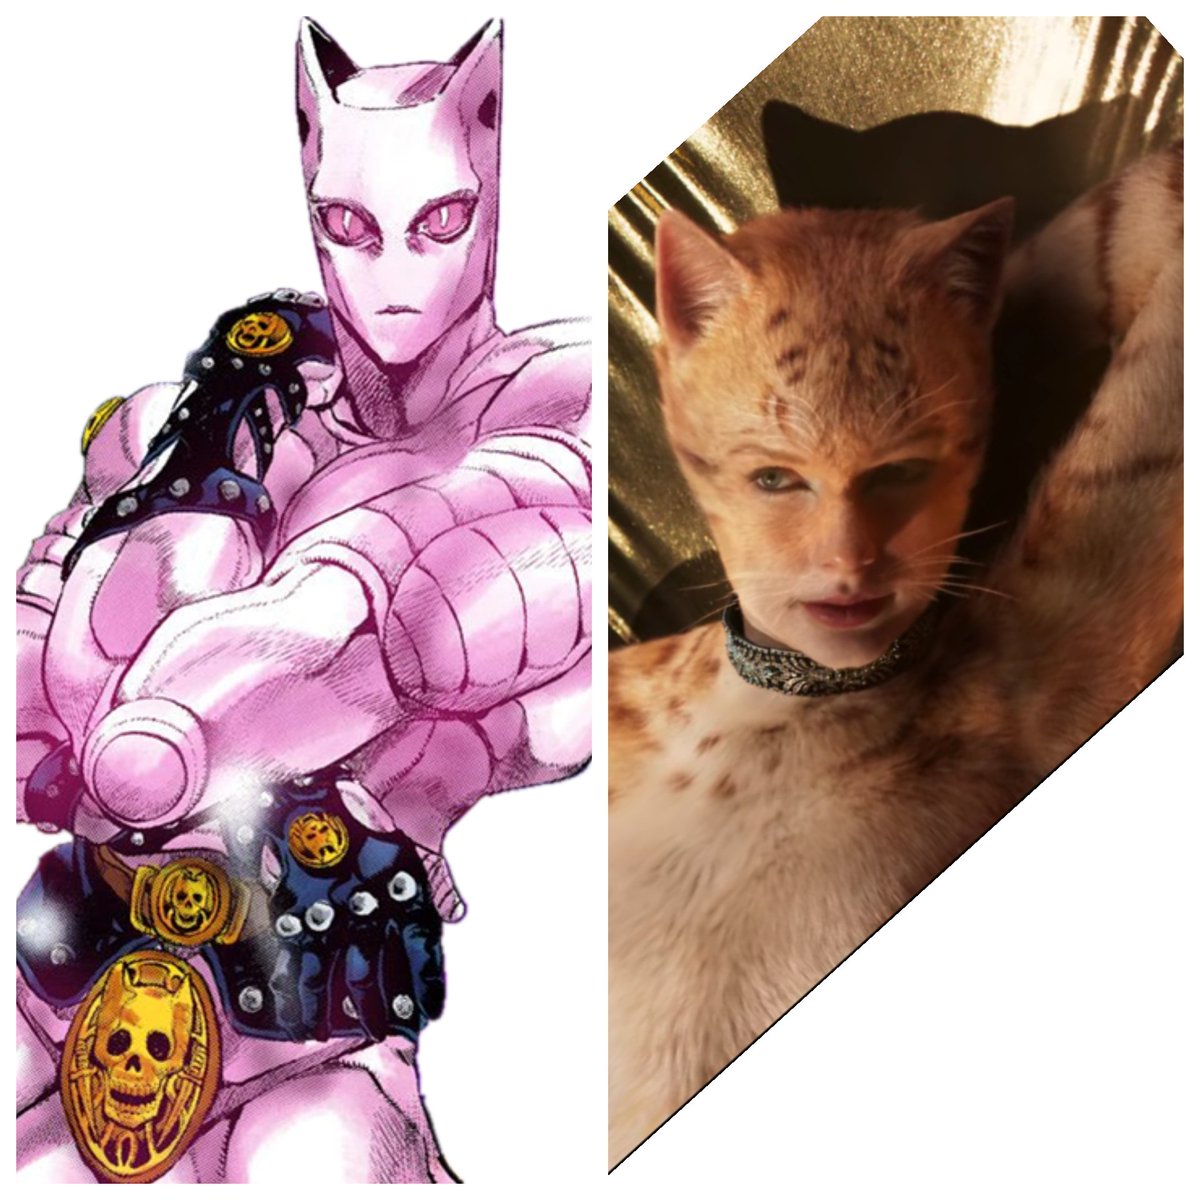 Art Eater I Don T Get It Why Did They Give Killer Queen A Human Nose Typical Uneccessary Hollywood Meddling Jjba キラークイーン Catsthemovie T Co Eoouvq8bzv